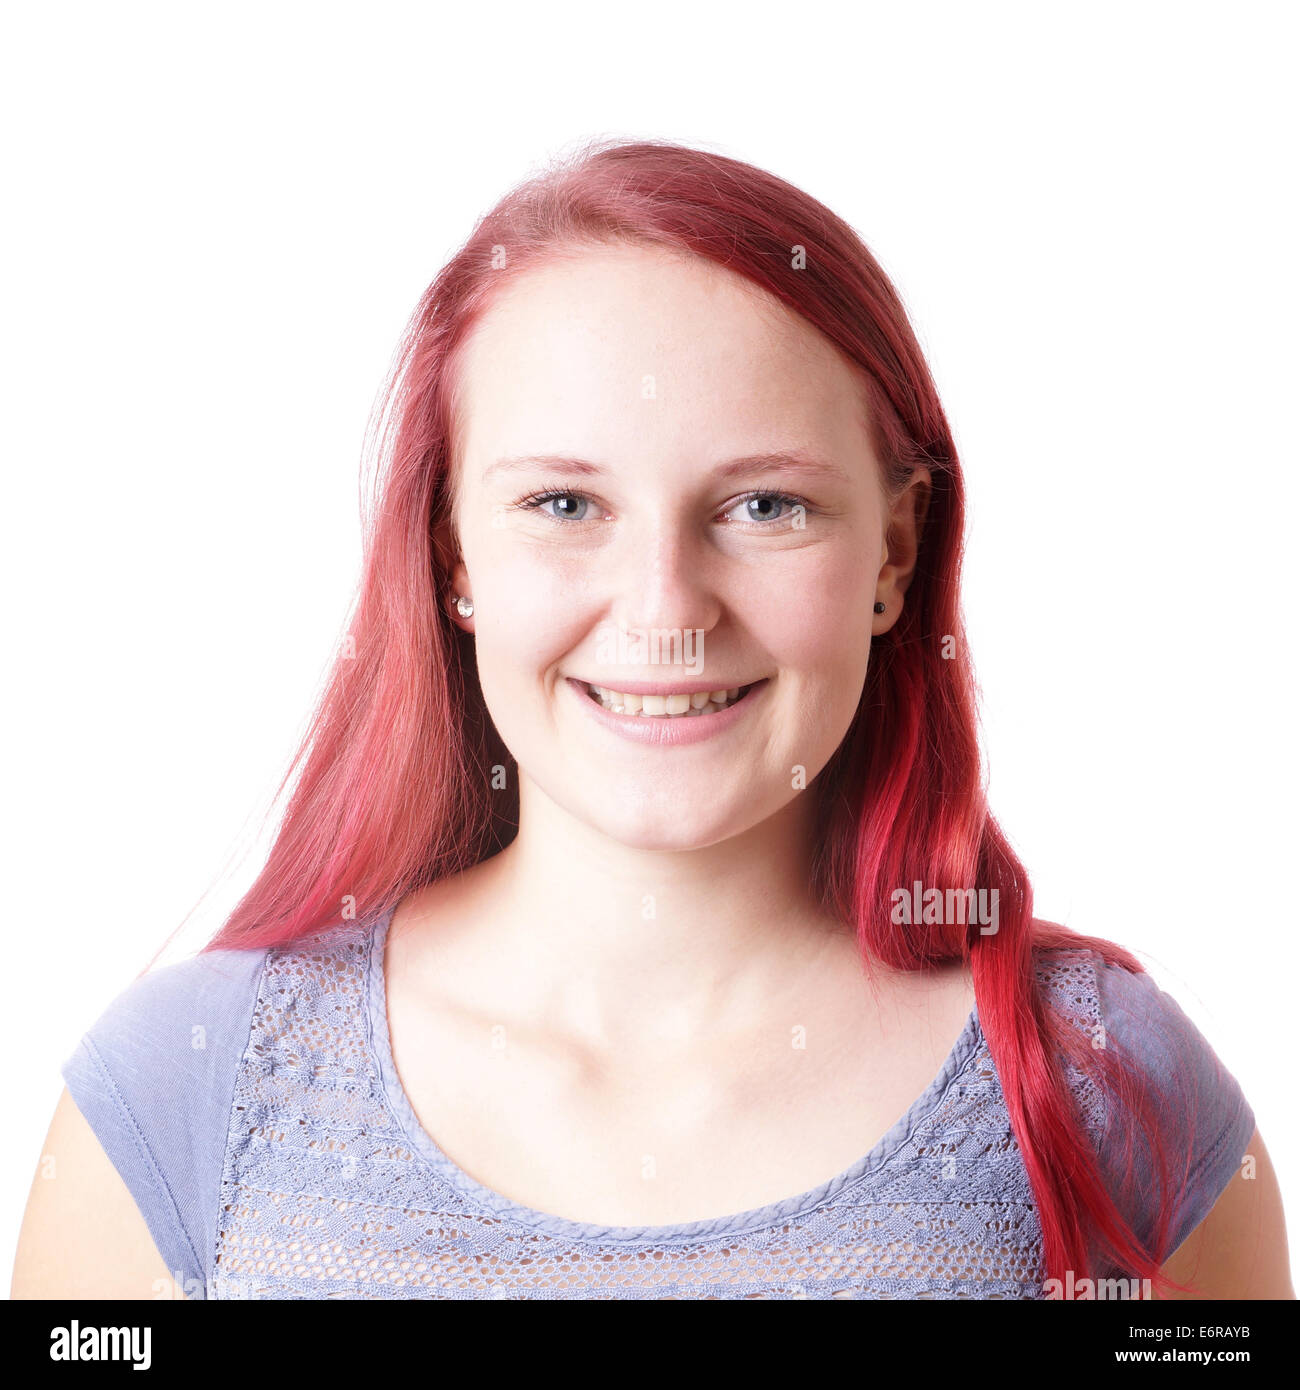 smiling young woman with long red hair Stock Photo